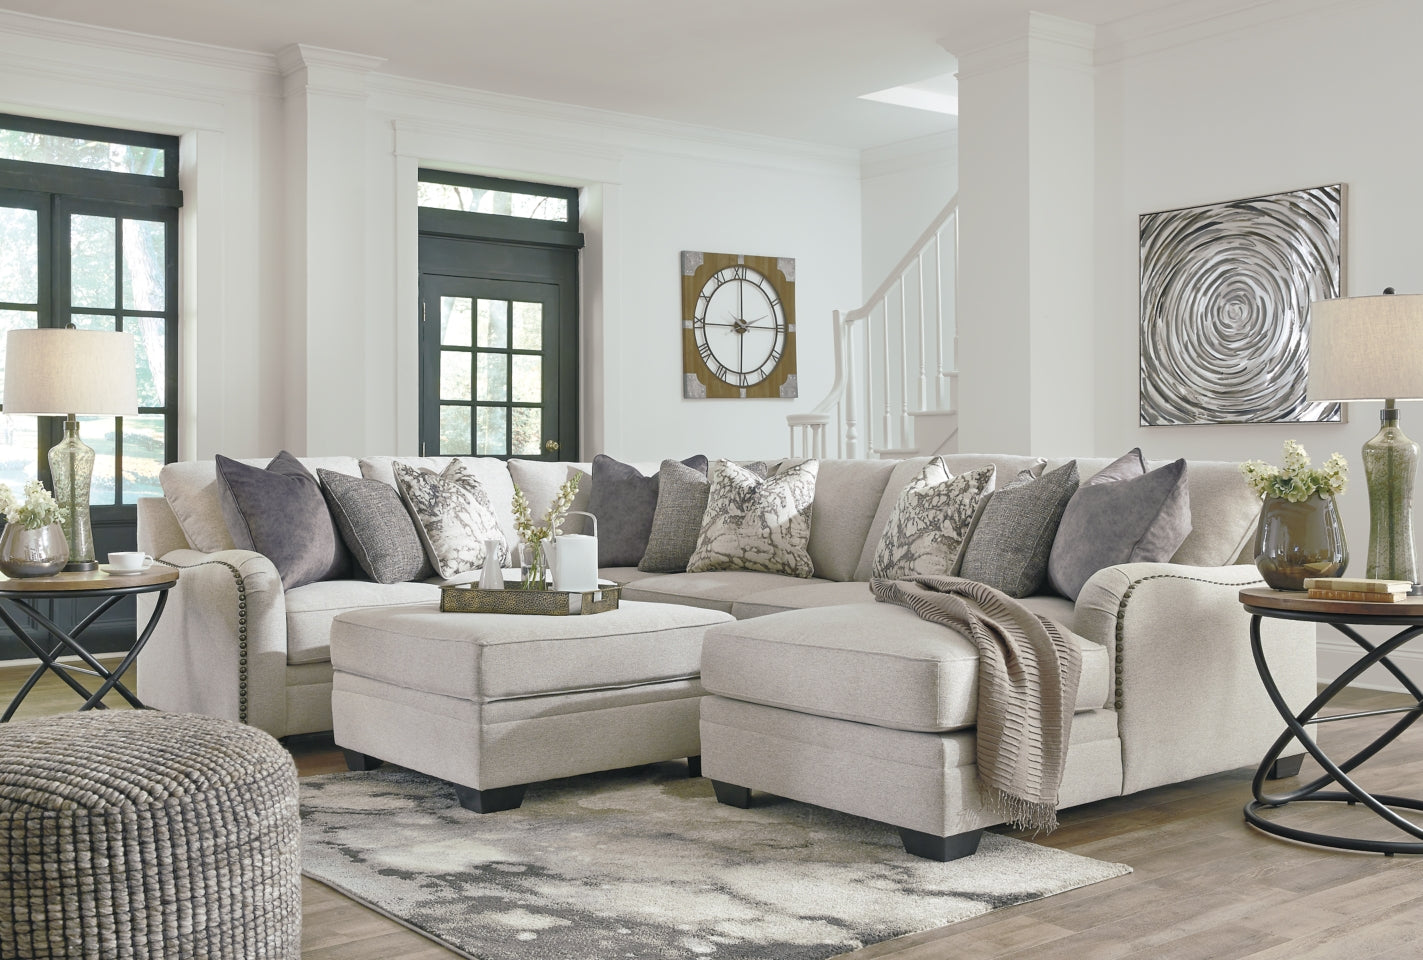 Dellara 4-Piece Sectional with Ottoman - PKG001116 - furniture place usa